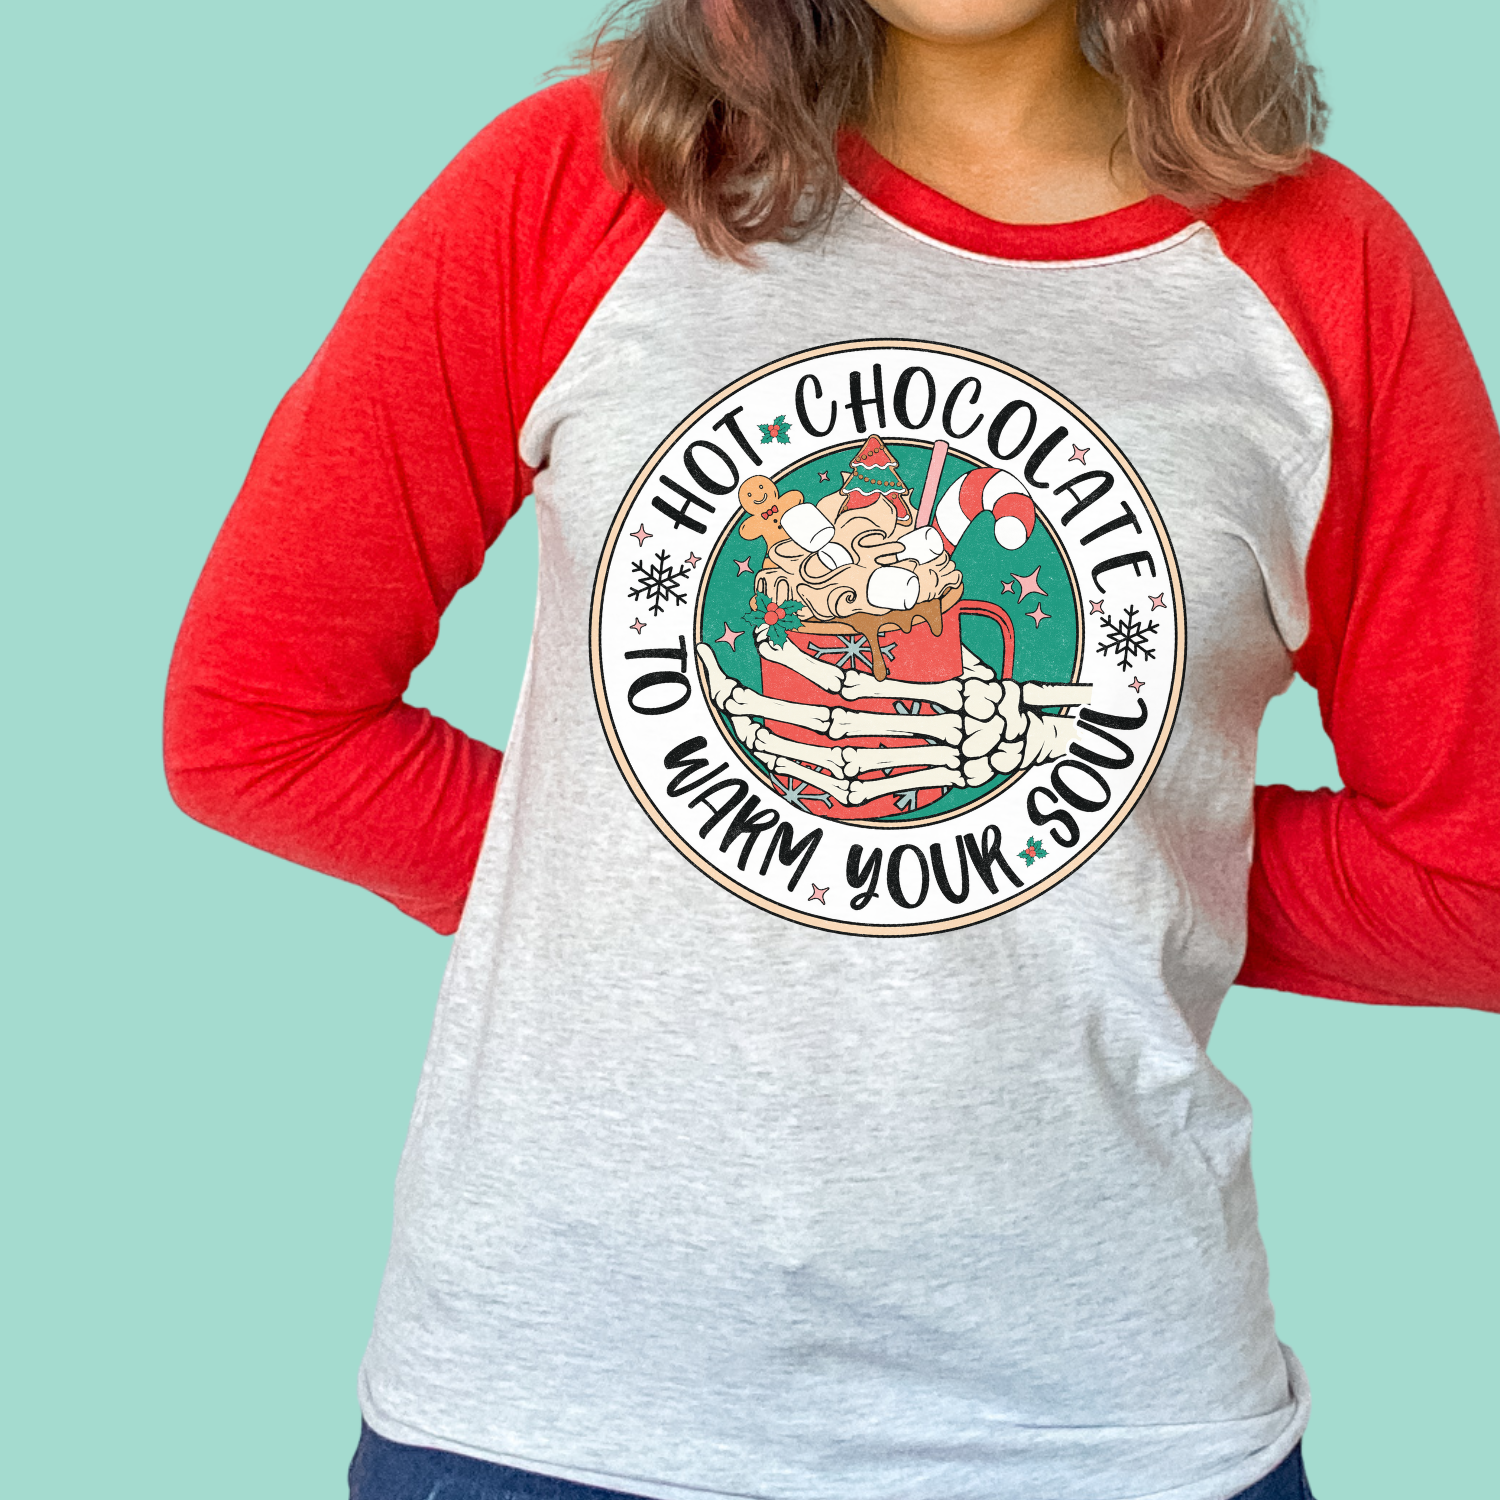 Hot Chocolate to Warm Your Soul Shirt